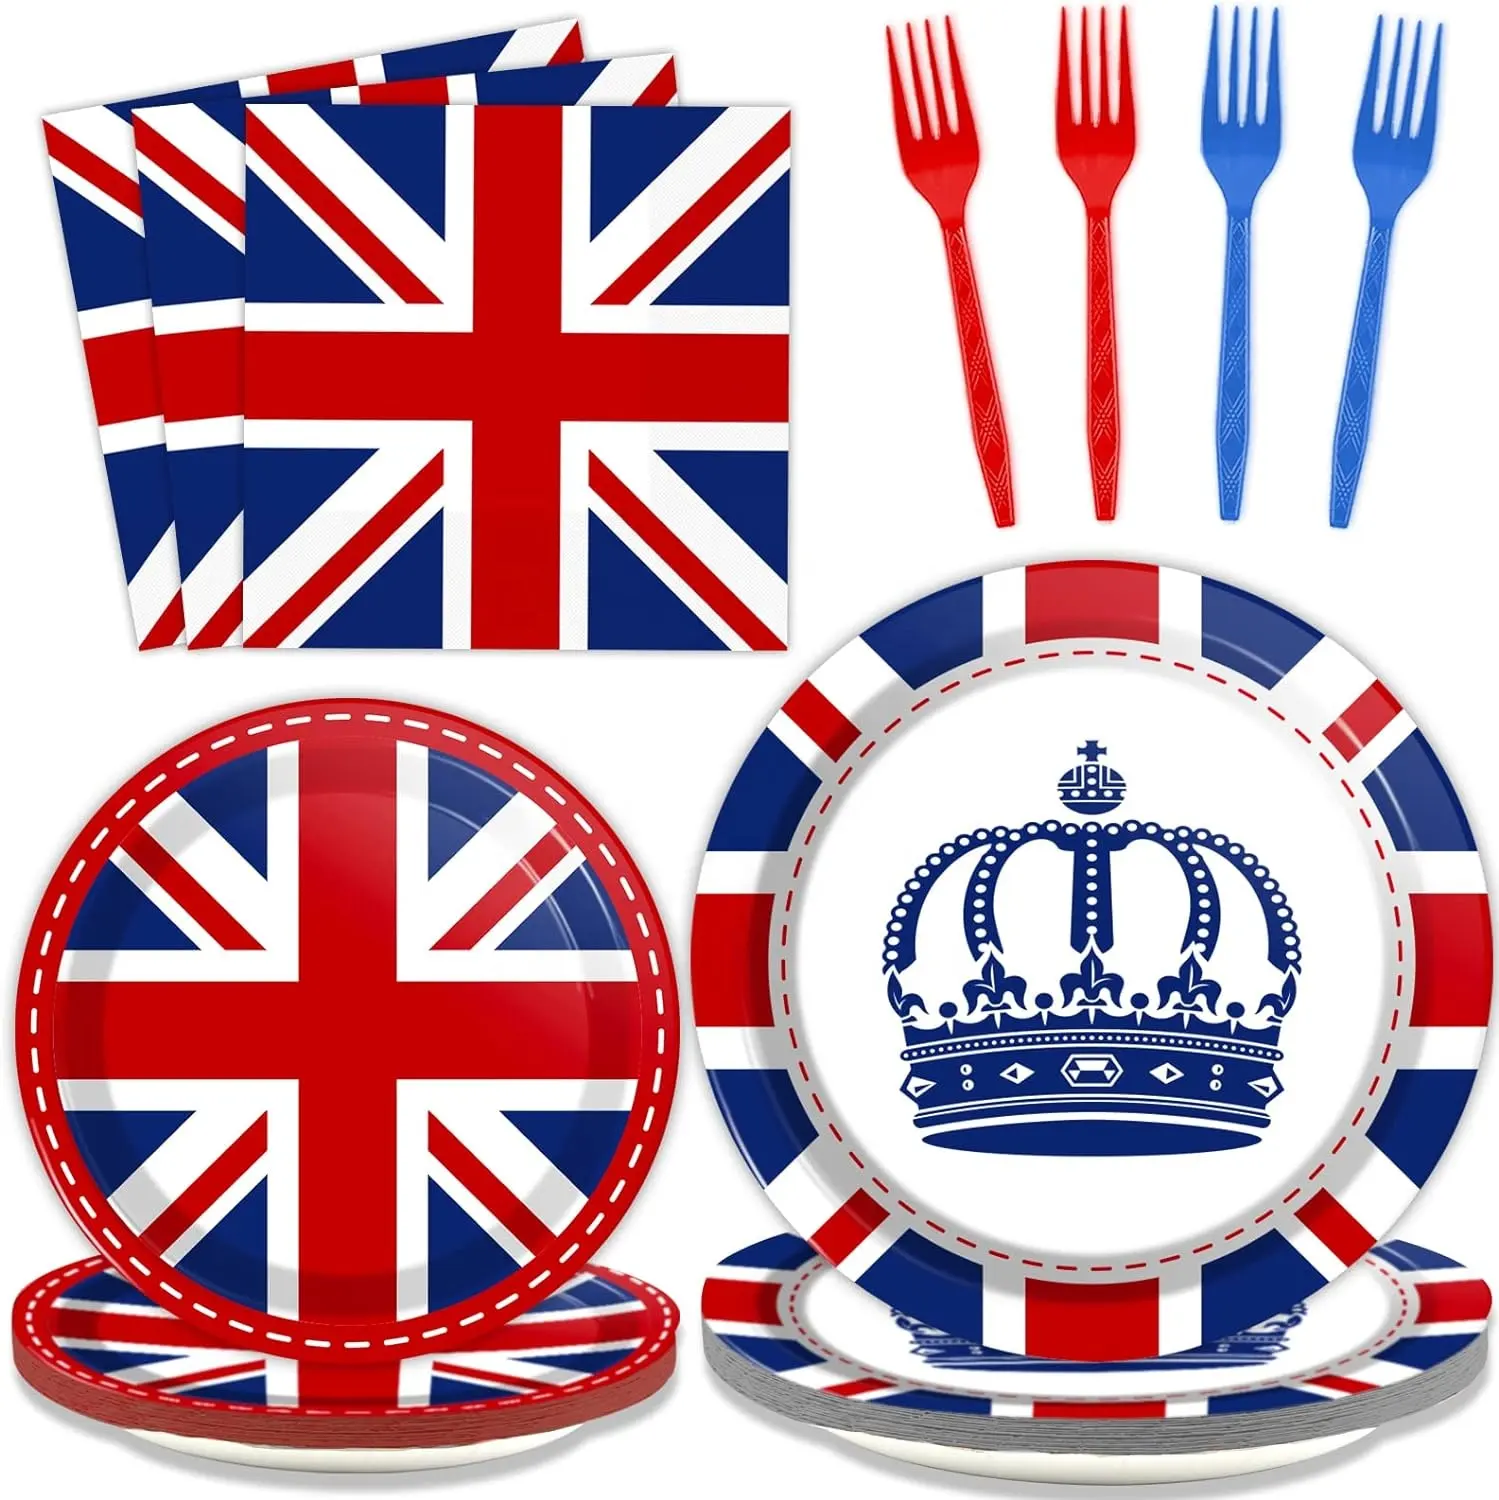 96 Pcs Britain UK England Flag Birthday Party British Flag Party Supplies Tableware Union Jack Party Decorations